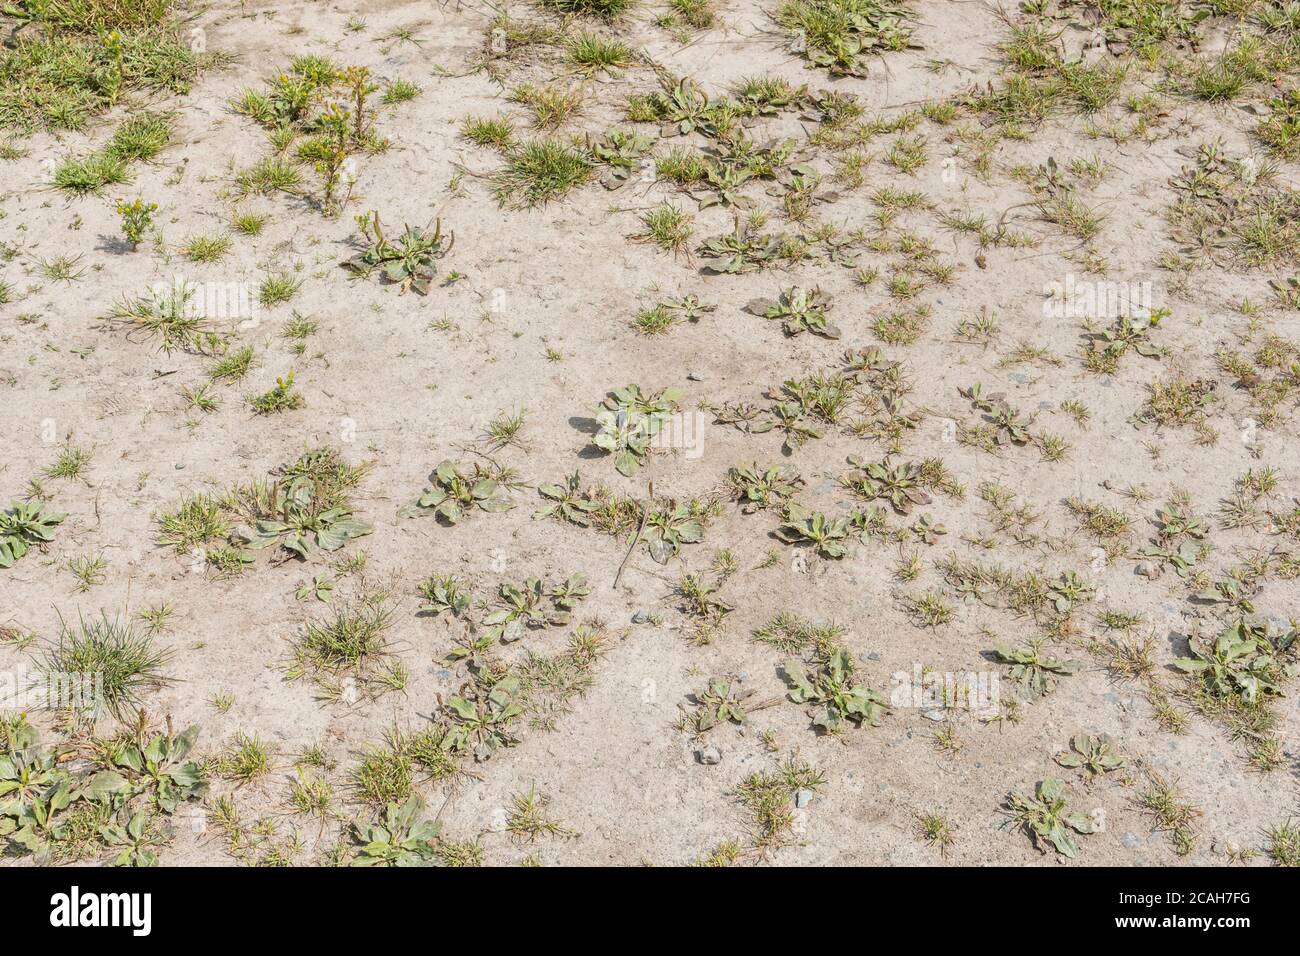 Weed patch mainly of Greater Plantain / Plantago major in drying sun baked mud. Some Pineappleweed also present. For drought, summer water shortages. Stock Photo